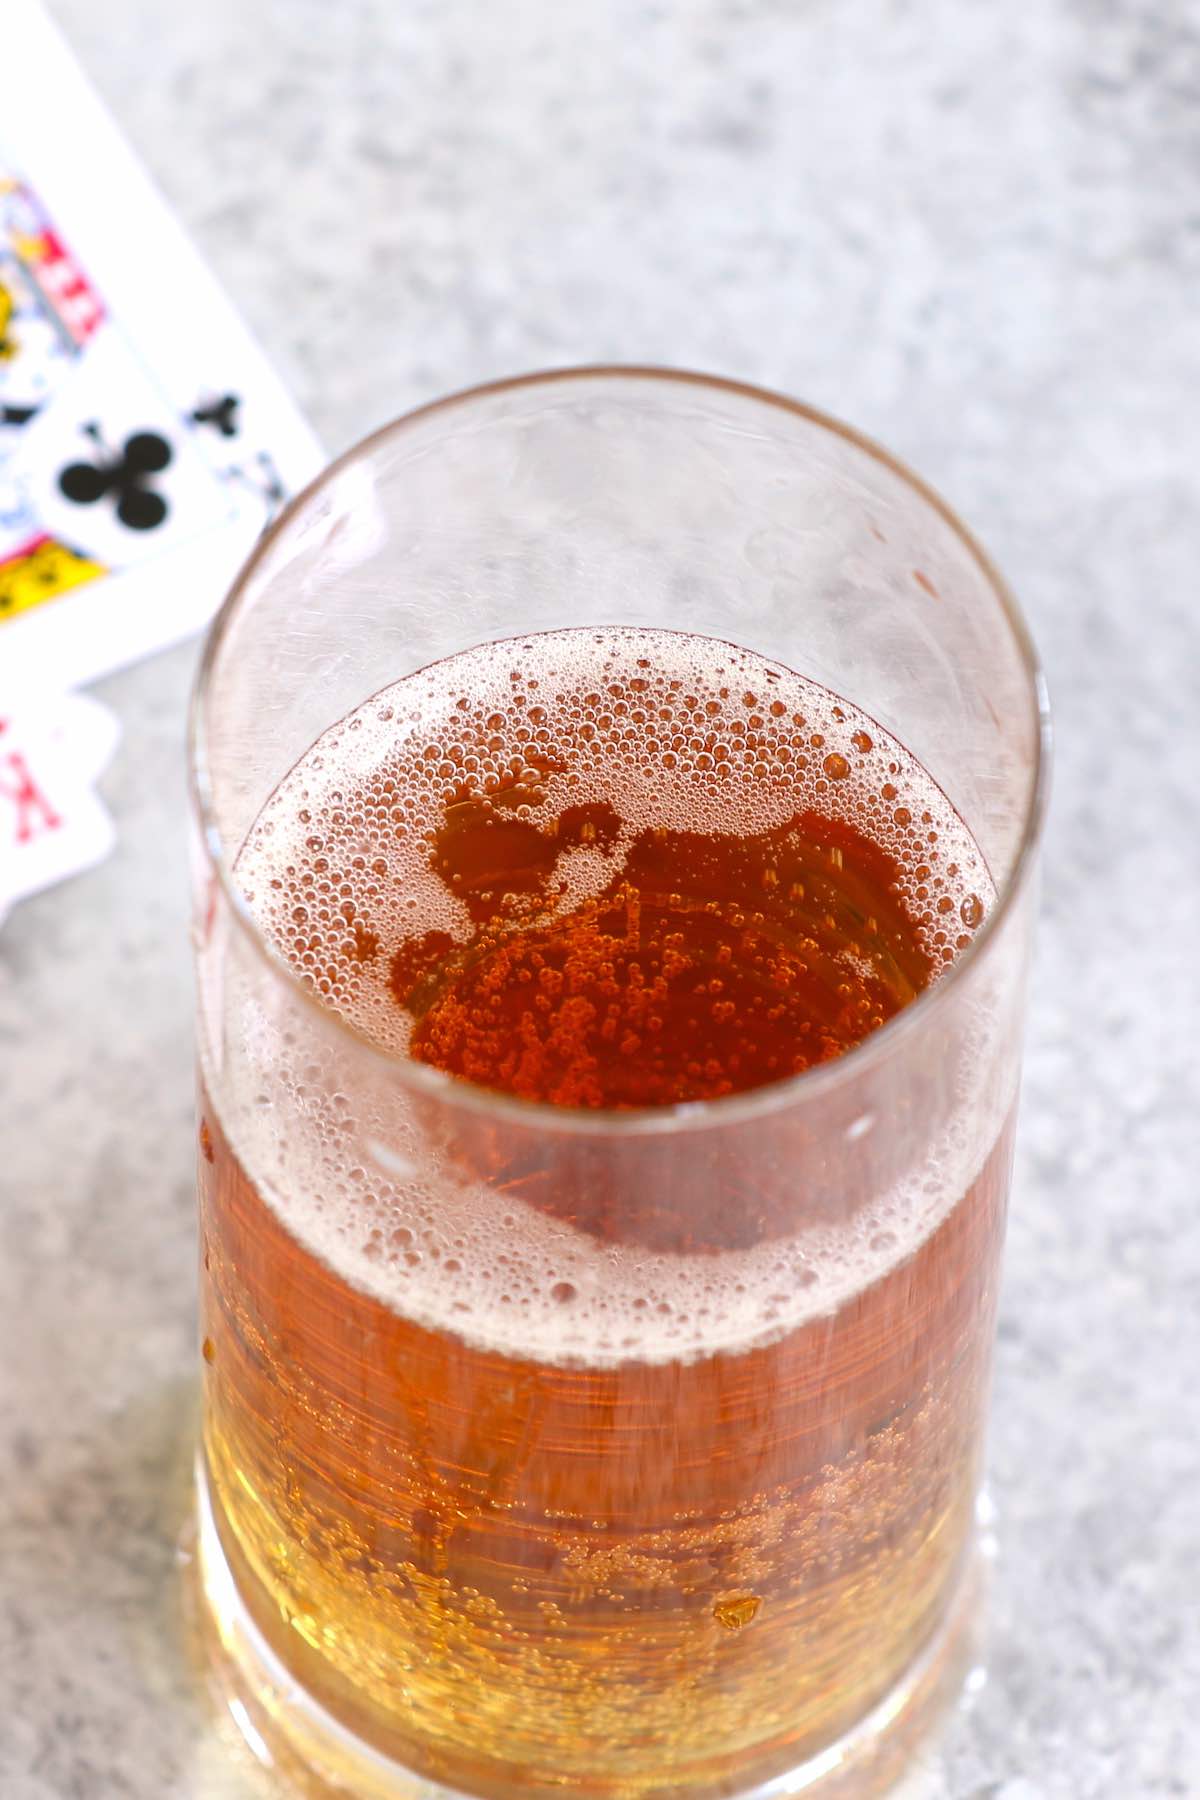 Viva Las Vegas Bomb! This electrifying cocktail is made from Royal Flush Shot and Red Bull energy drink. You can make this perfect party drink at home and impress friends and family with your bartending skills. 